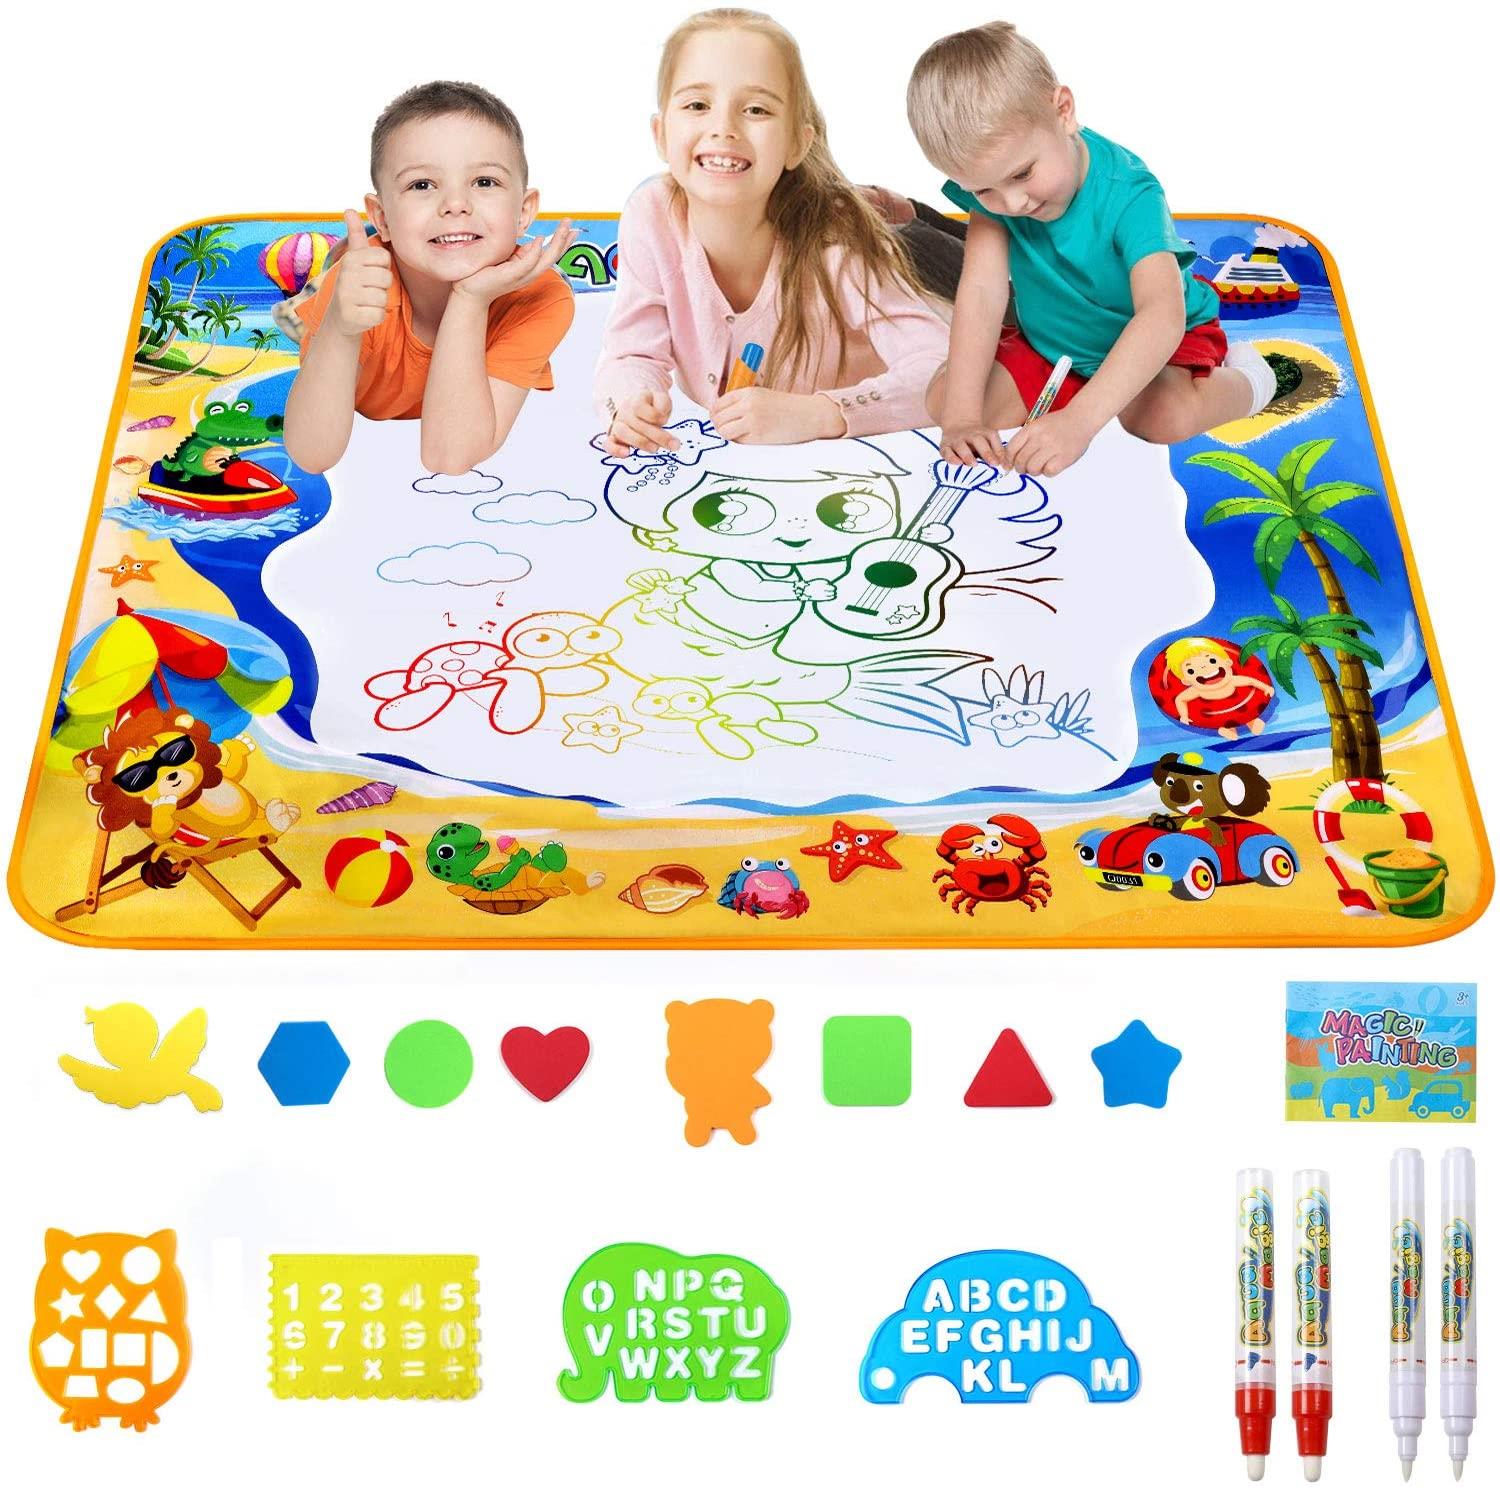 Doodle Drawing Mat 40 x 32 inch Large Aqua Magic Water Drawing Mat Toy Gifts for Boys Girls Kids